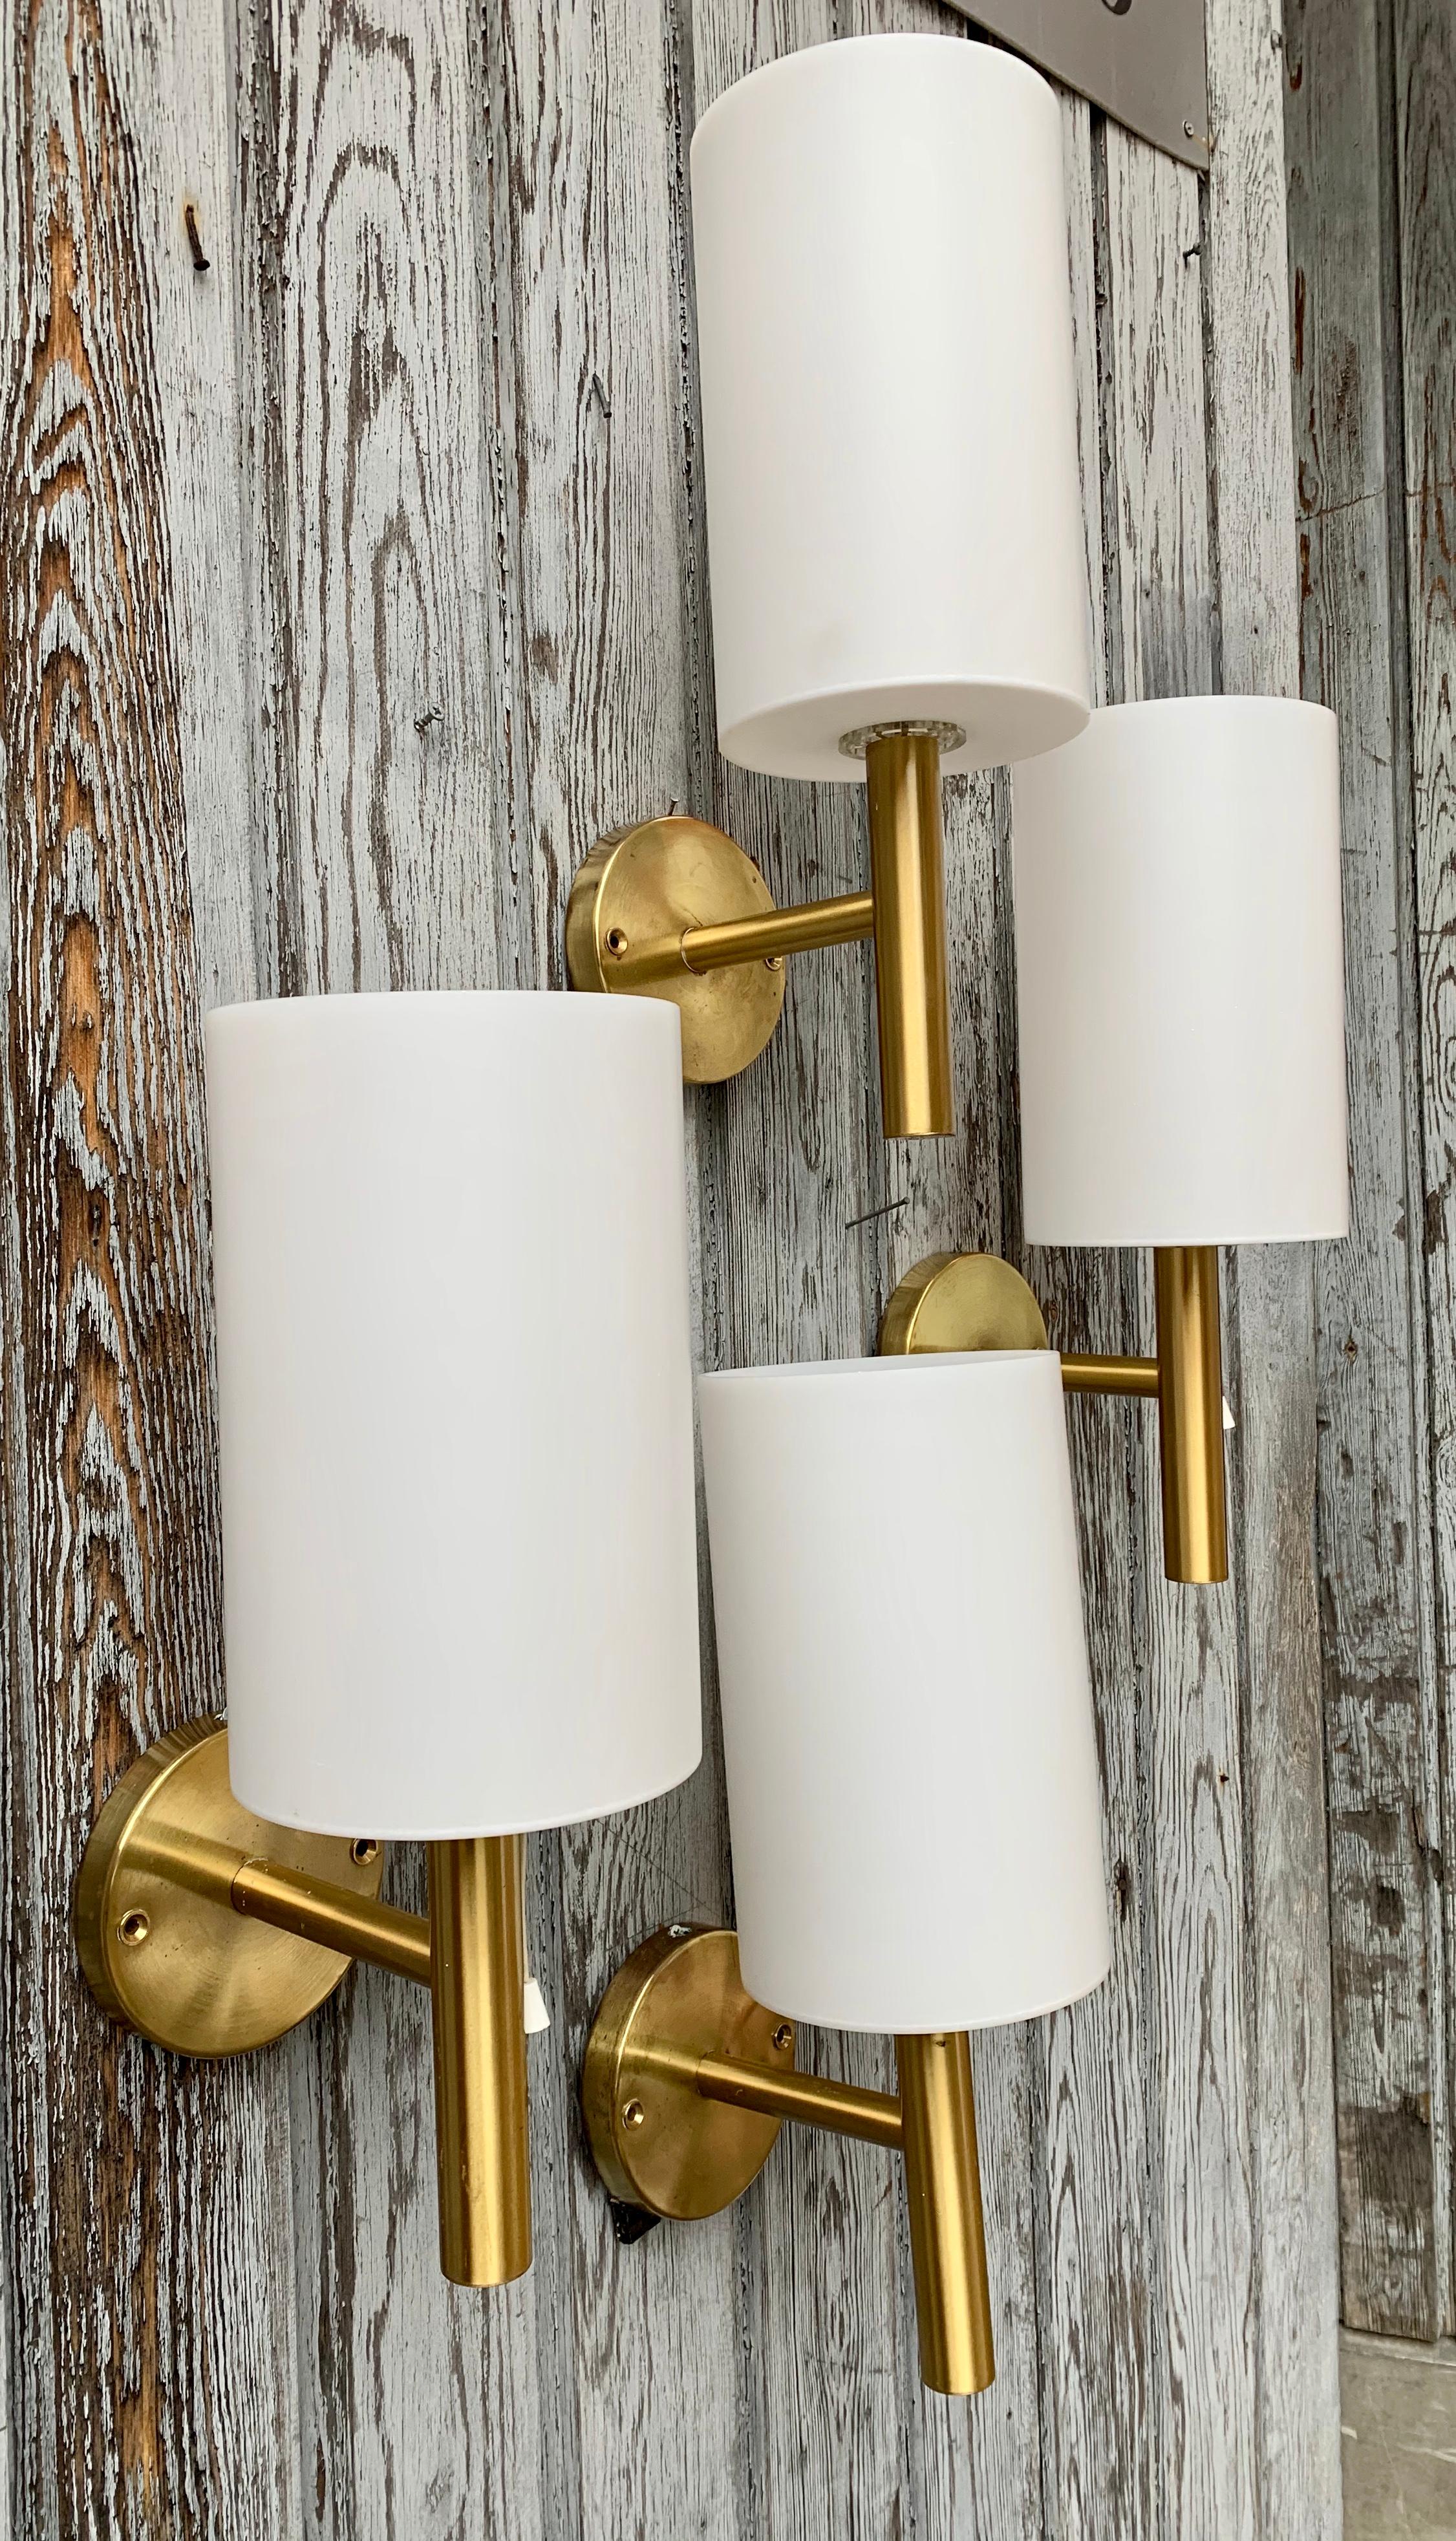 20th Century Set of 4 Swedish Modern Brass Wall Sconces, circa 1980 For Sale